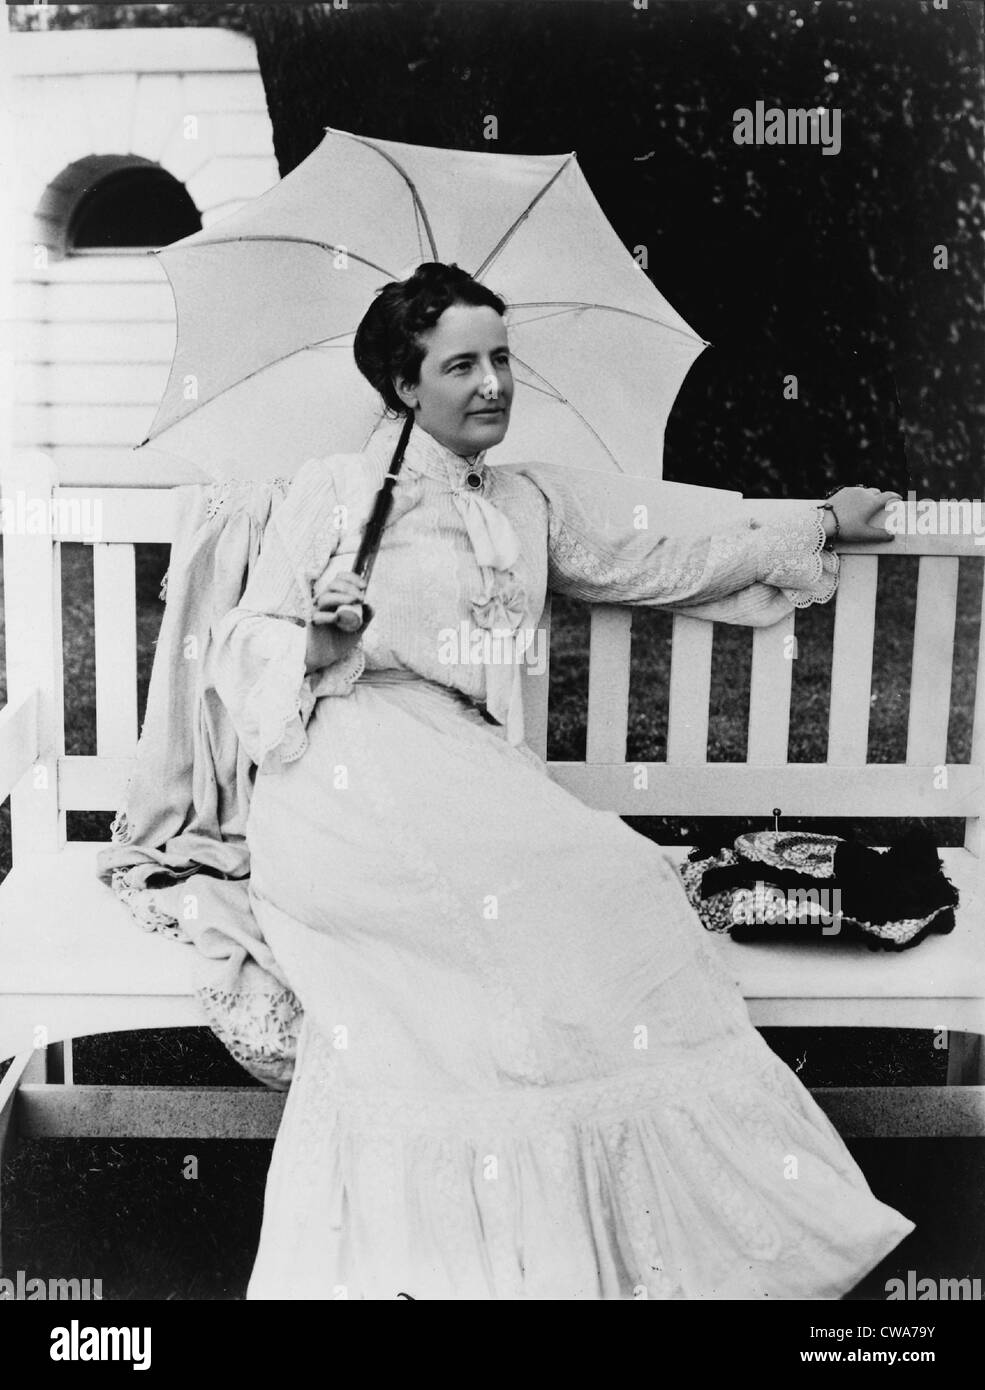 Portrait of First Lady, Edith Kermit Carow Roosevelt, seated outdoors on bench, holding umbrella. Ca. 1900-08. Stock Photo